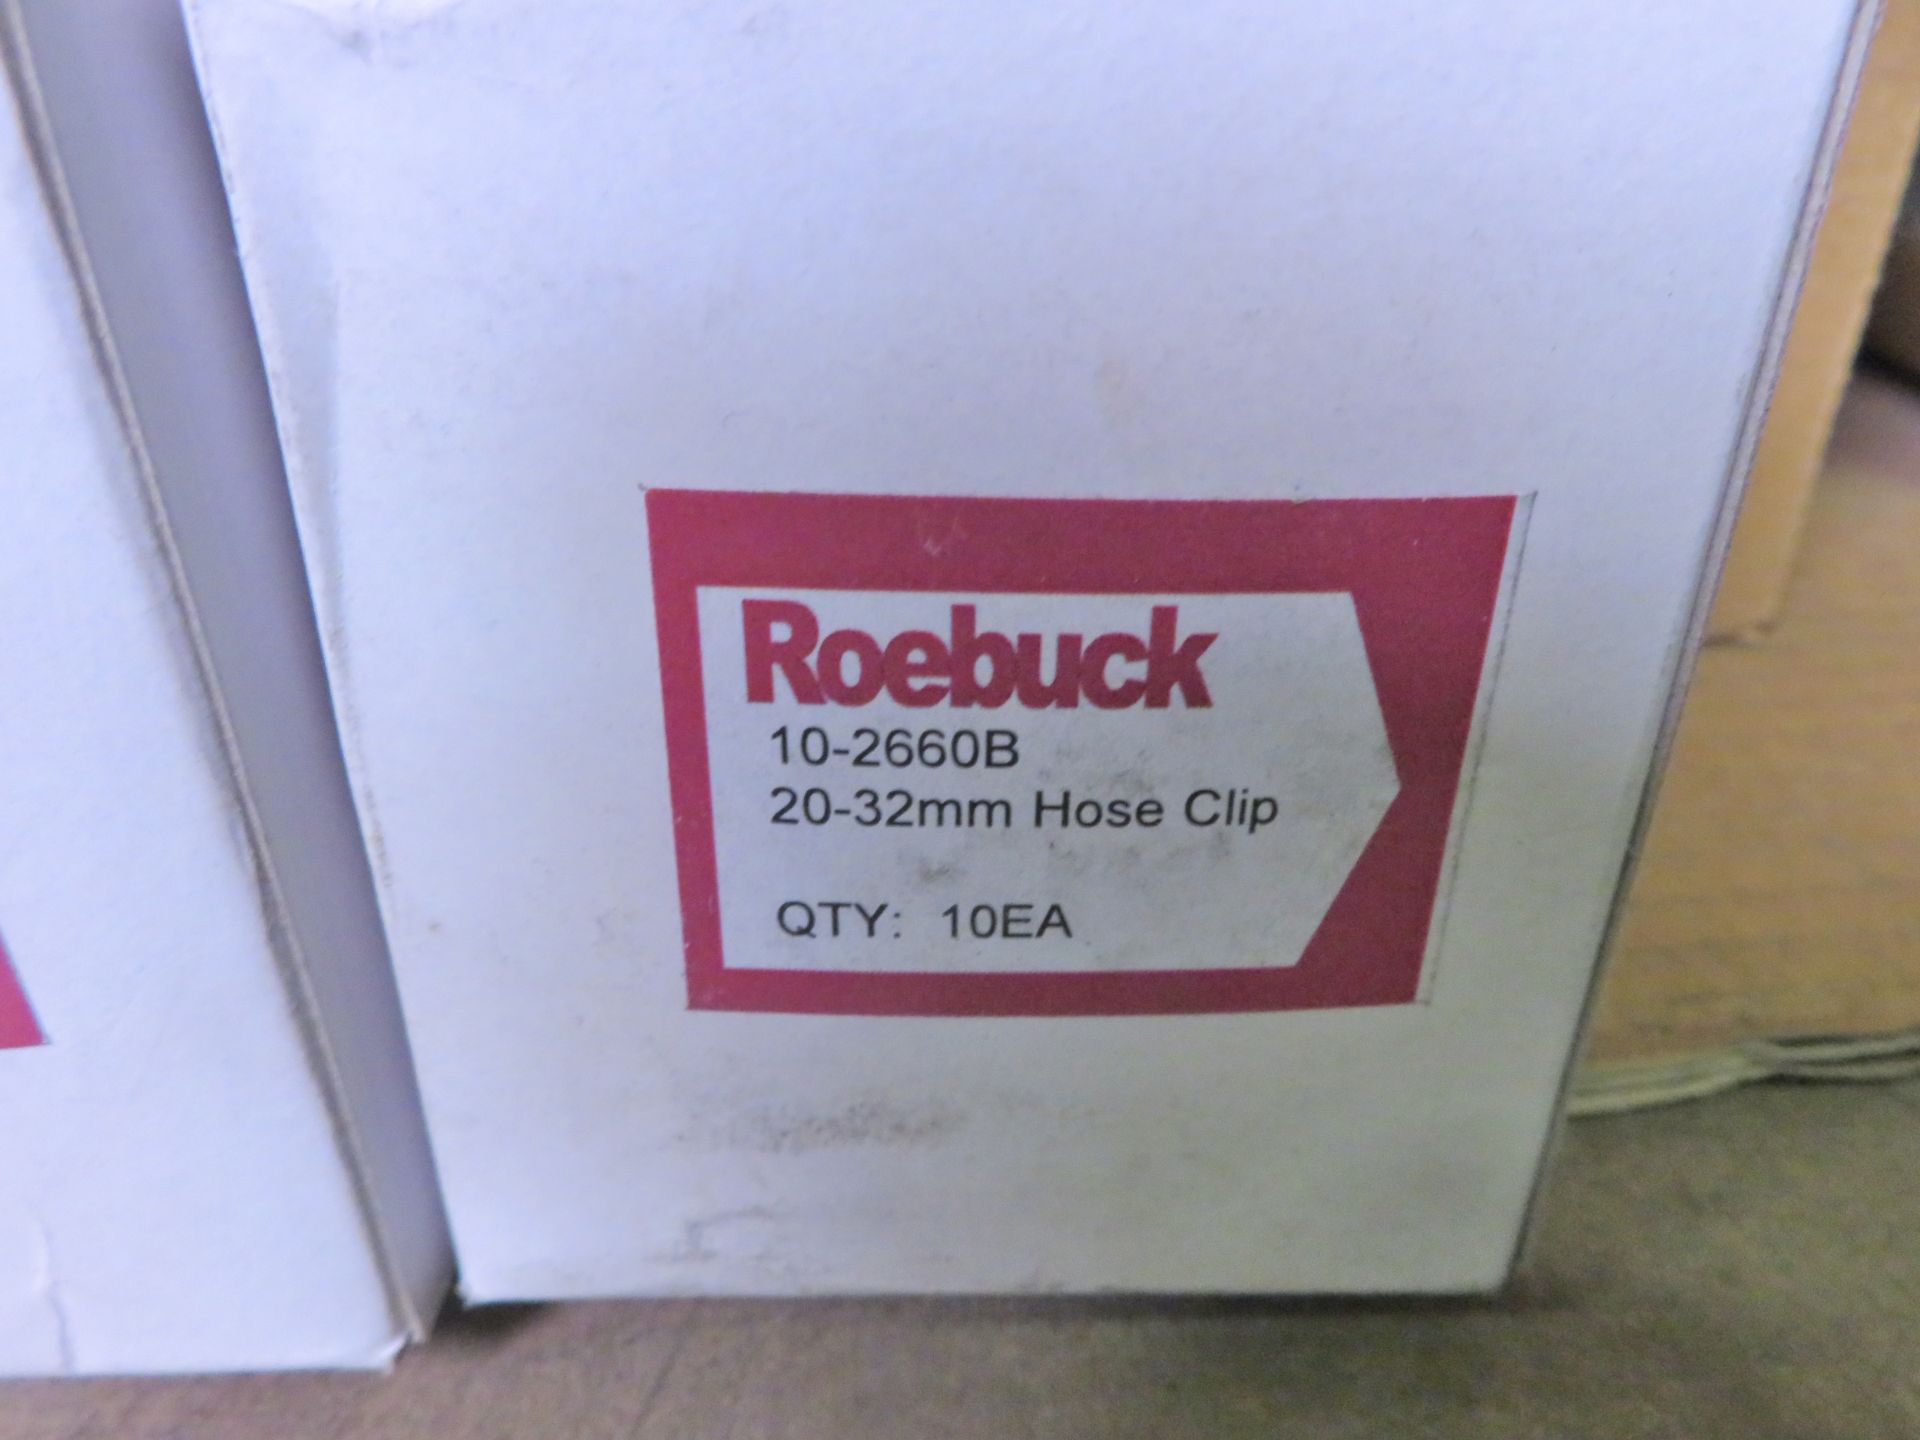 Roebuck 20-32mm Hose clips - 28 boxes - 10 clips per box - Image 3 of 4